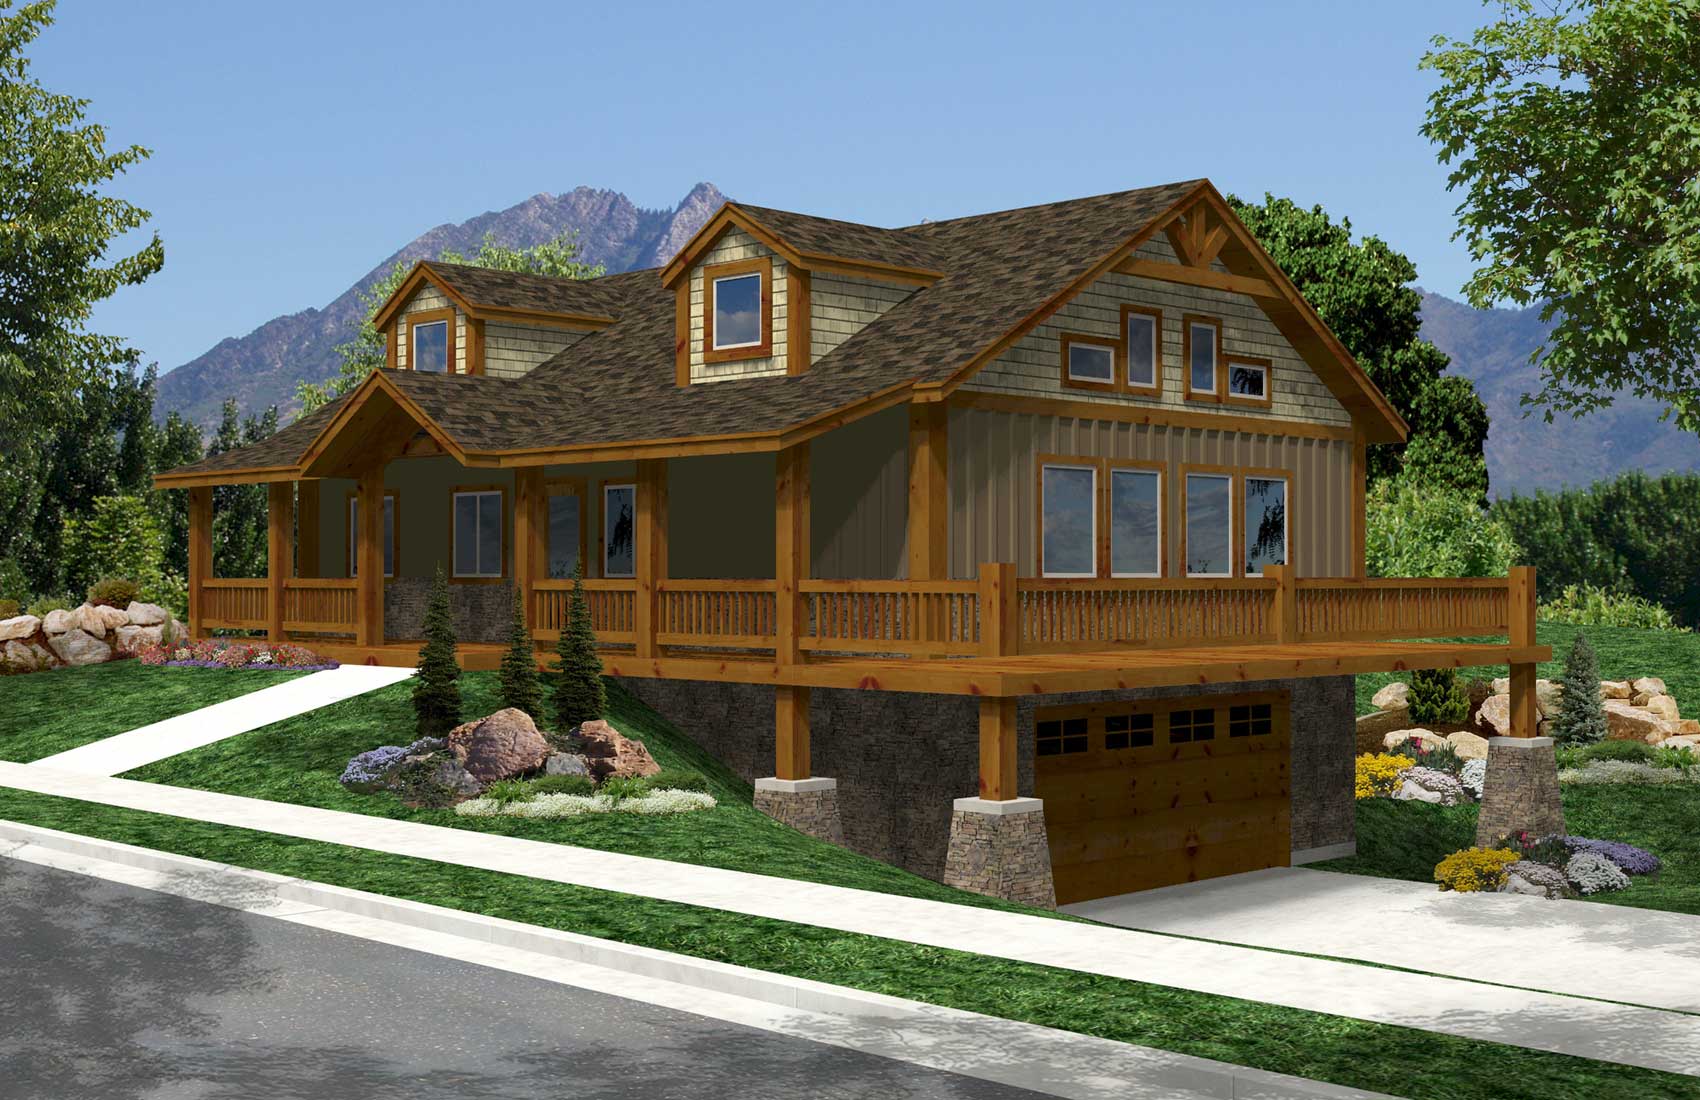 Luxury Log Finished Amazing Luxury Log Home Plans Finished In Modern Design With Green View Showcased From House Front Yard Area Design Architecture  Luxury Log Home Plans For Bold Natural Image 